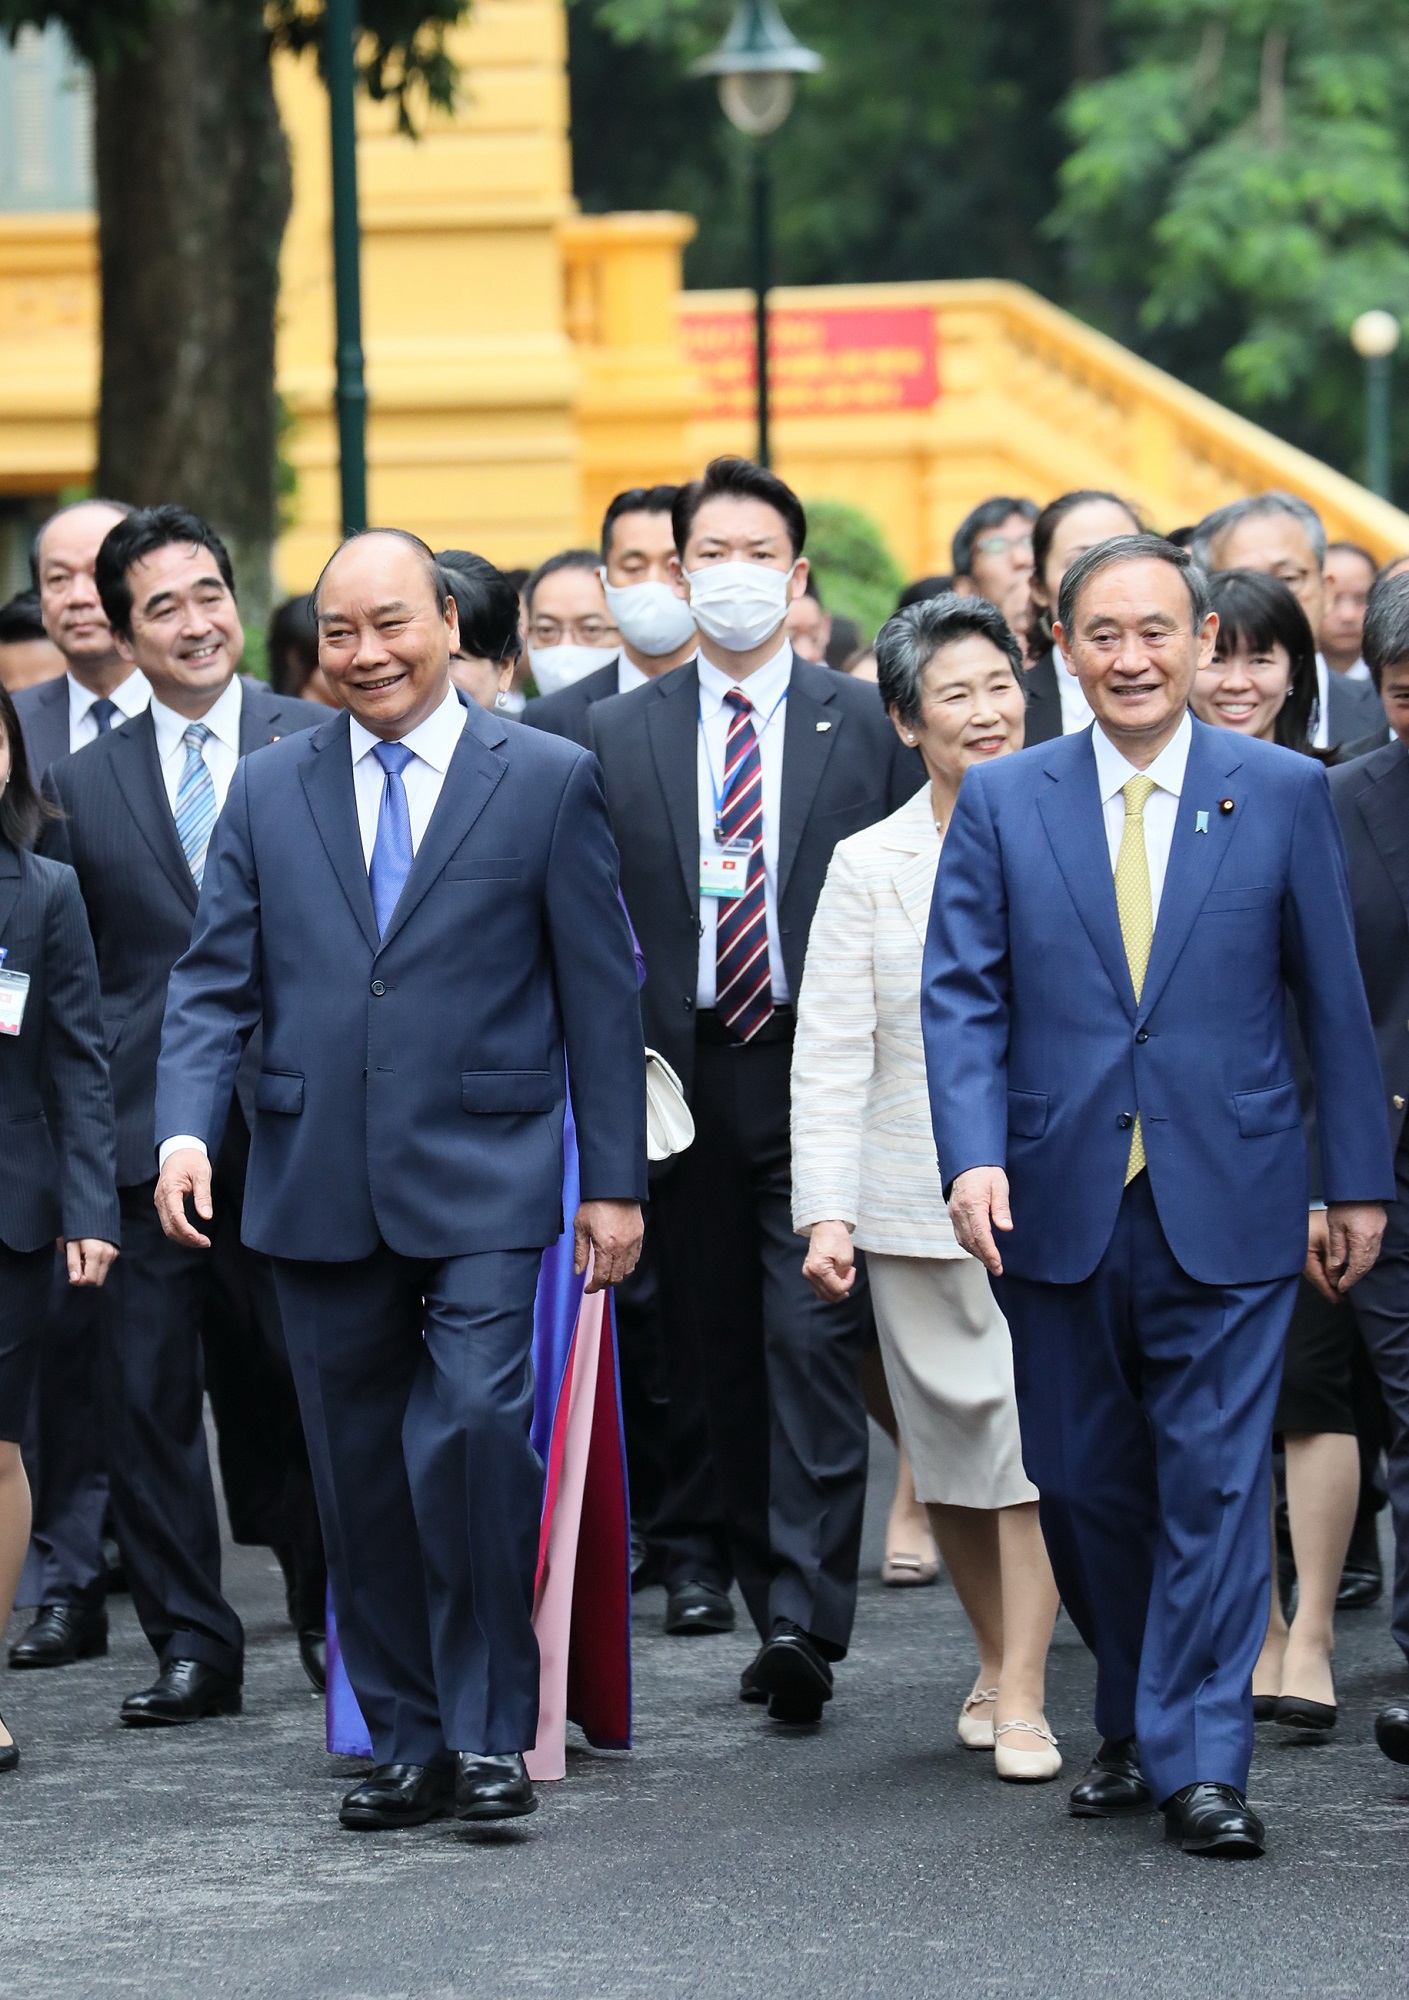 Photograph of the two leaders attending the Japan-Viet Nam Summit Meeting